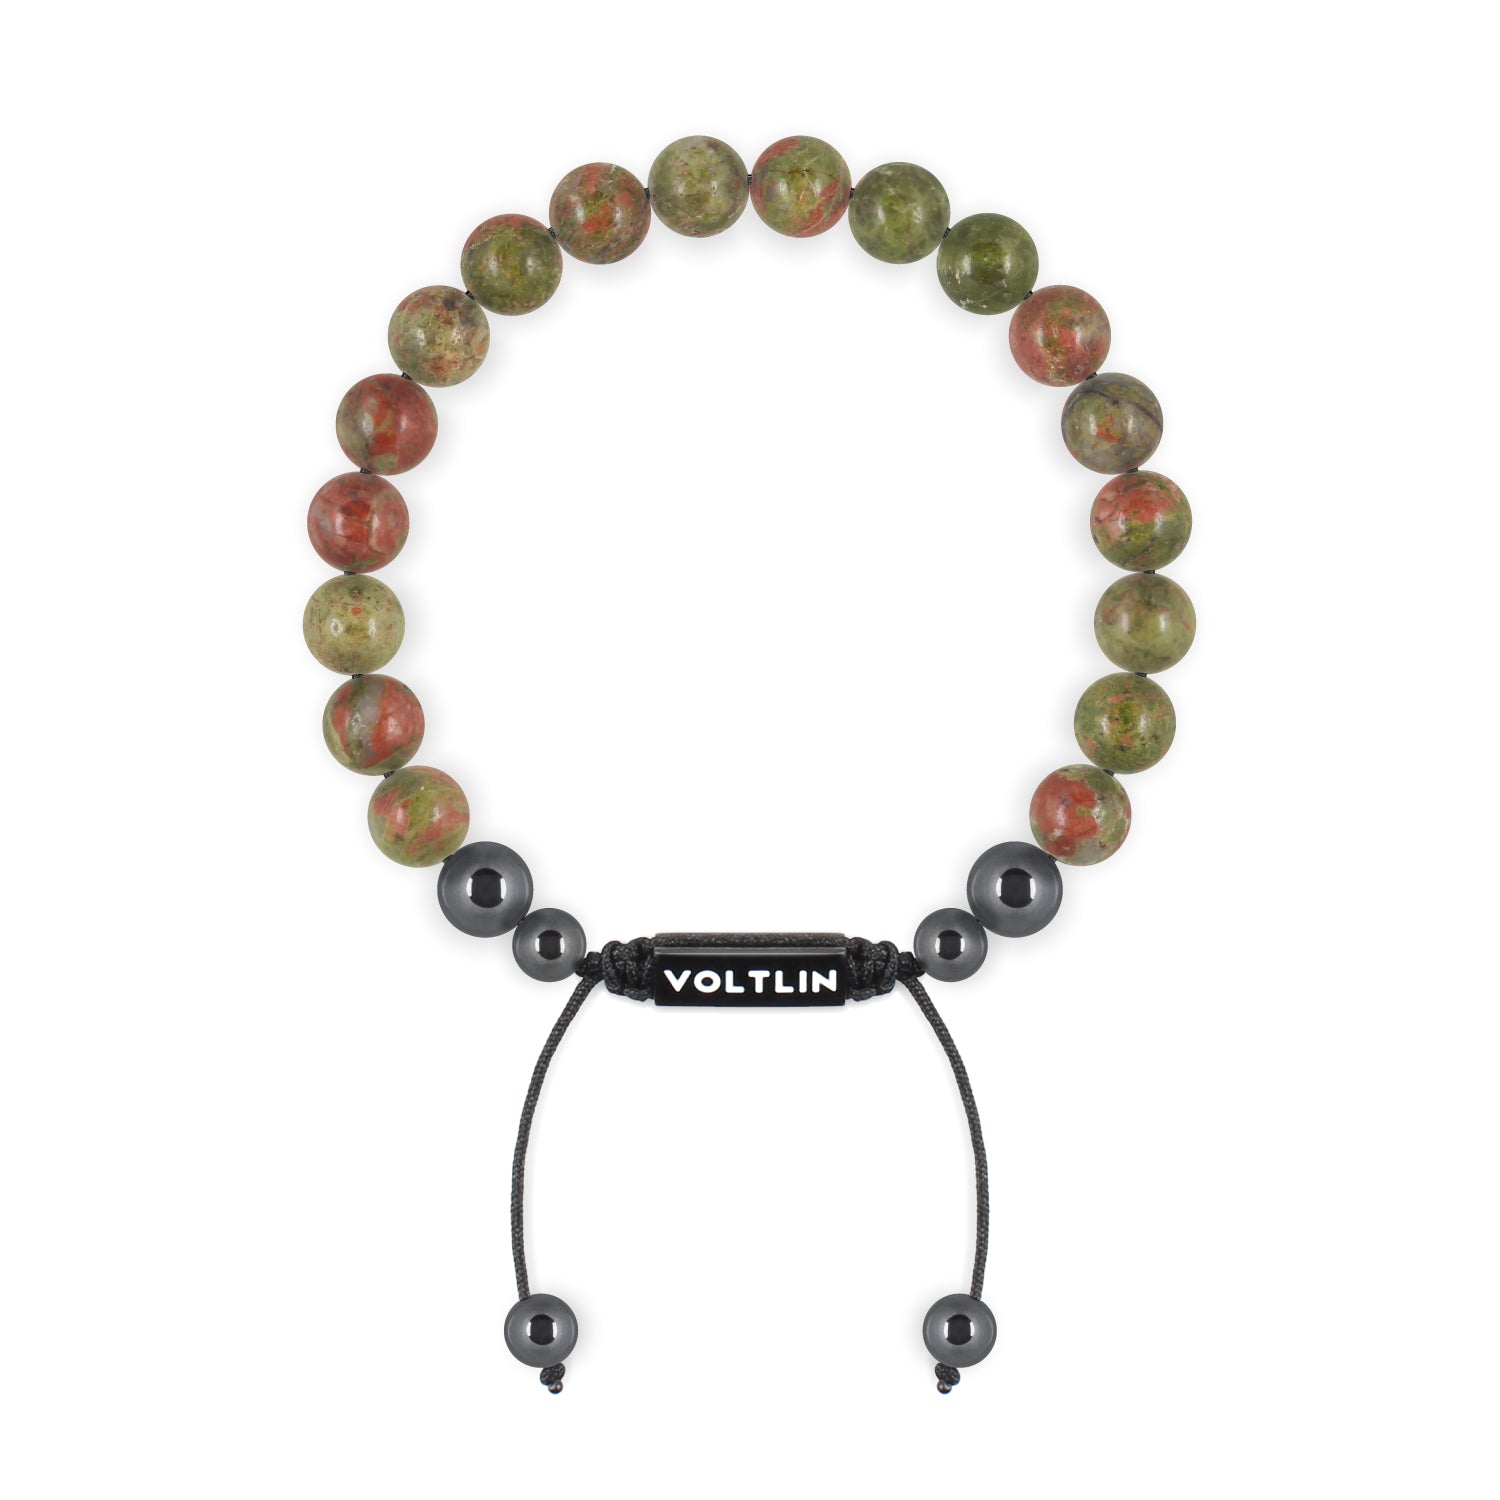 Front view of an 8mm Unakite crystal beaded shamballa bracelet with black stainless steel logo bead made by Voltlin